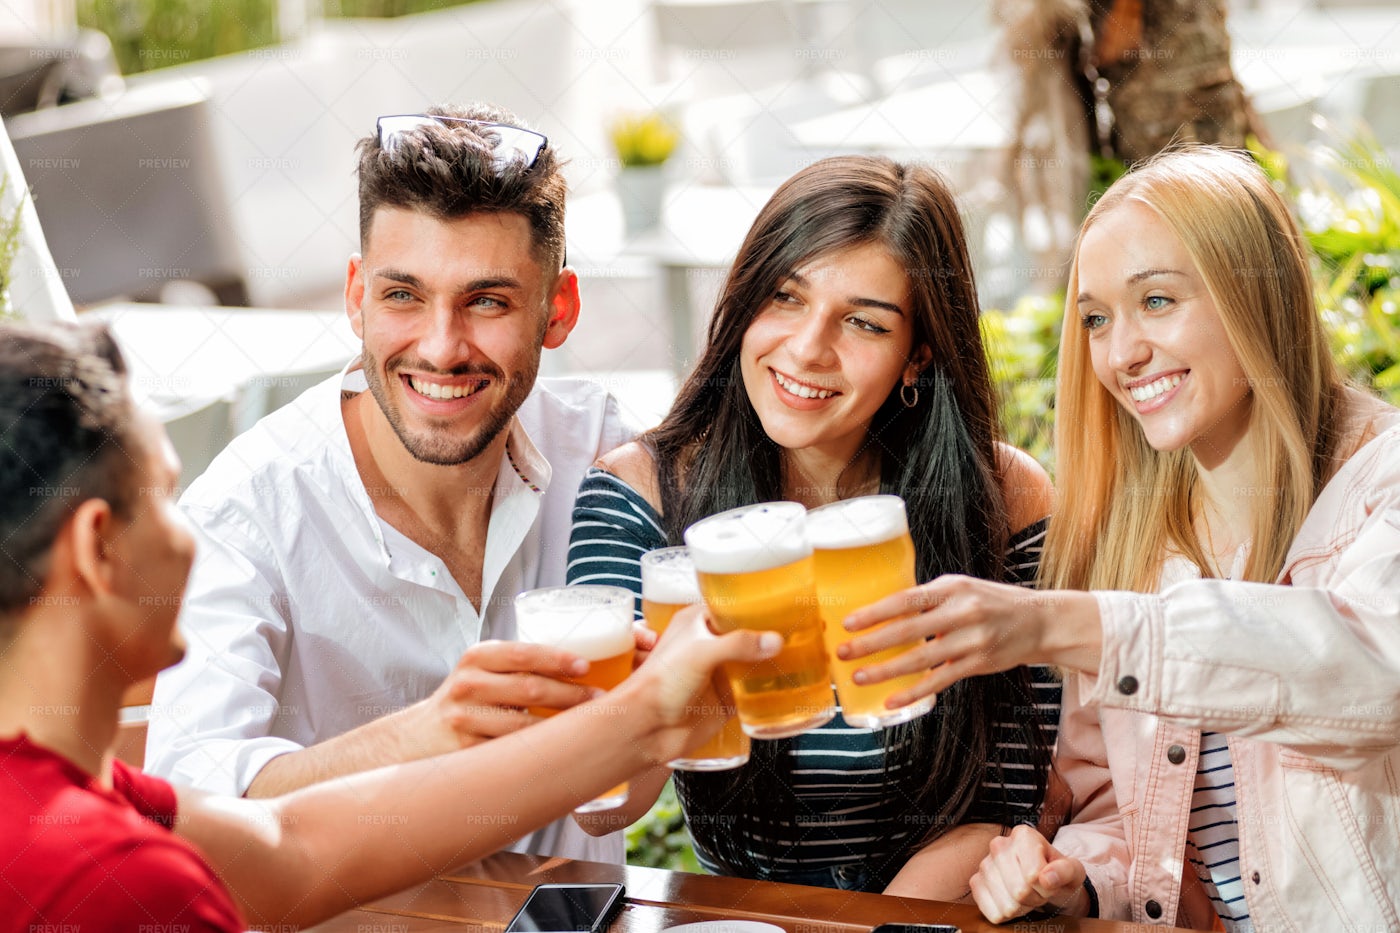 Friends Cheering For Birthday: Stock Photos